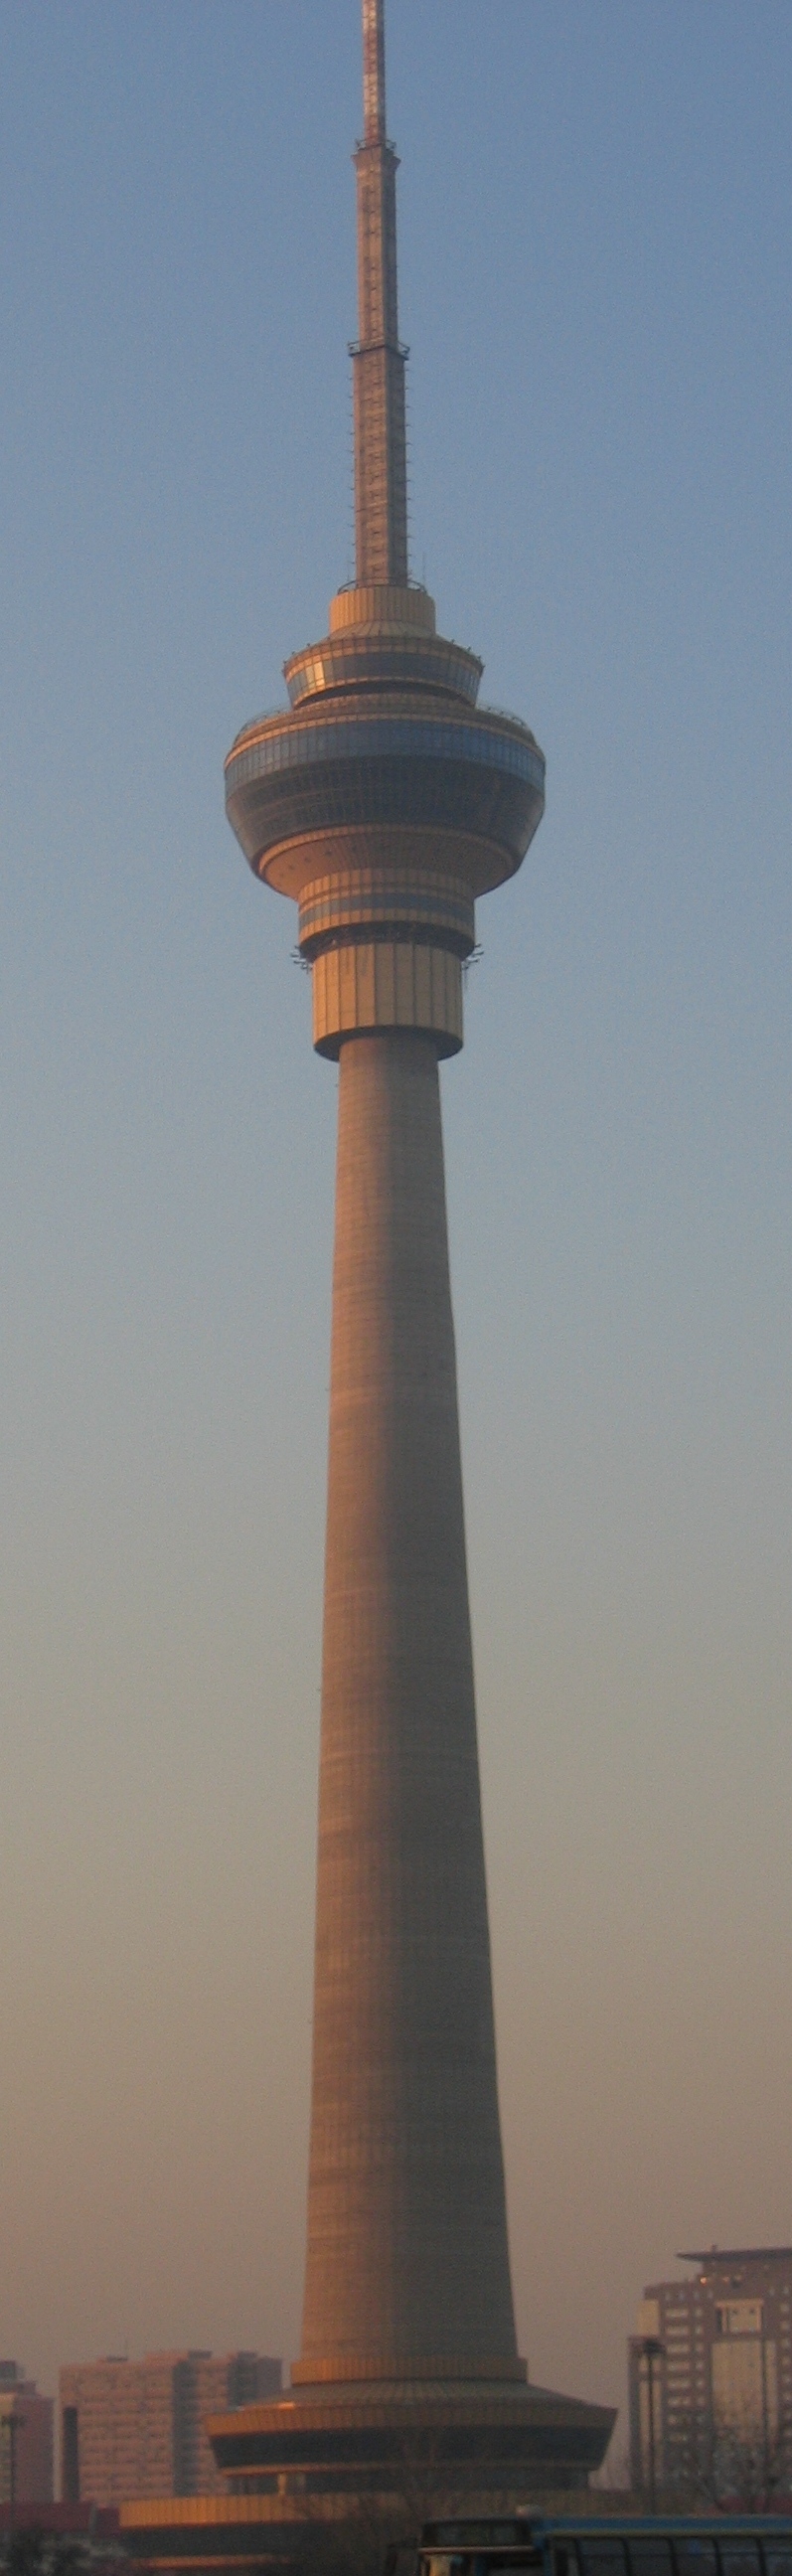 Air Pollution China - View of 1,329 feet (405 m) CCTV Tower and antenna